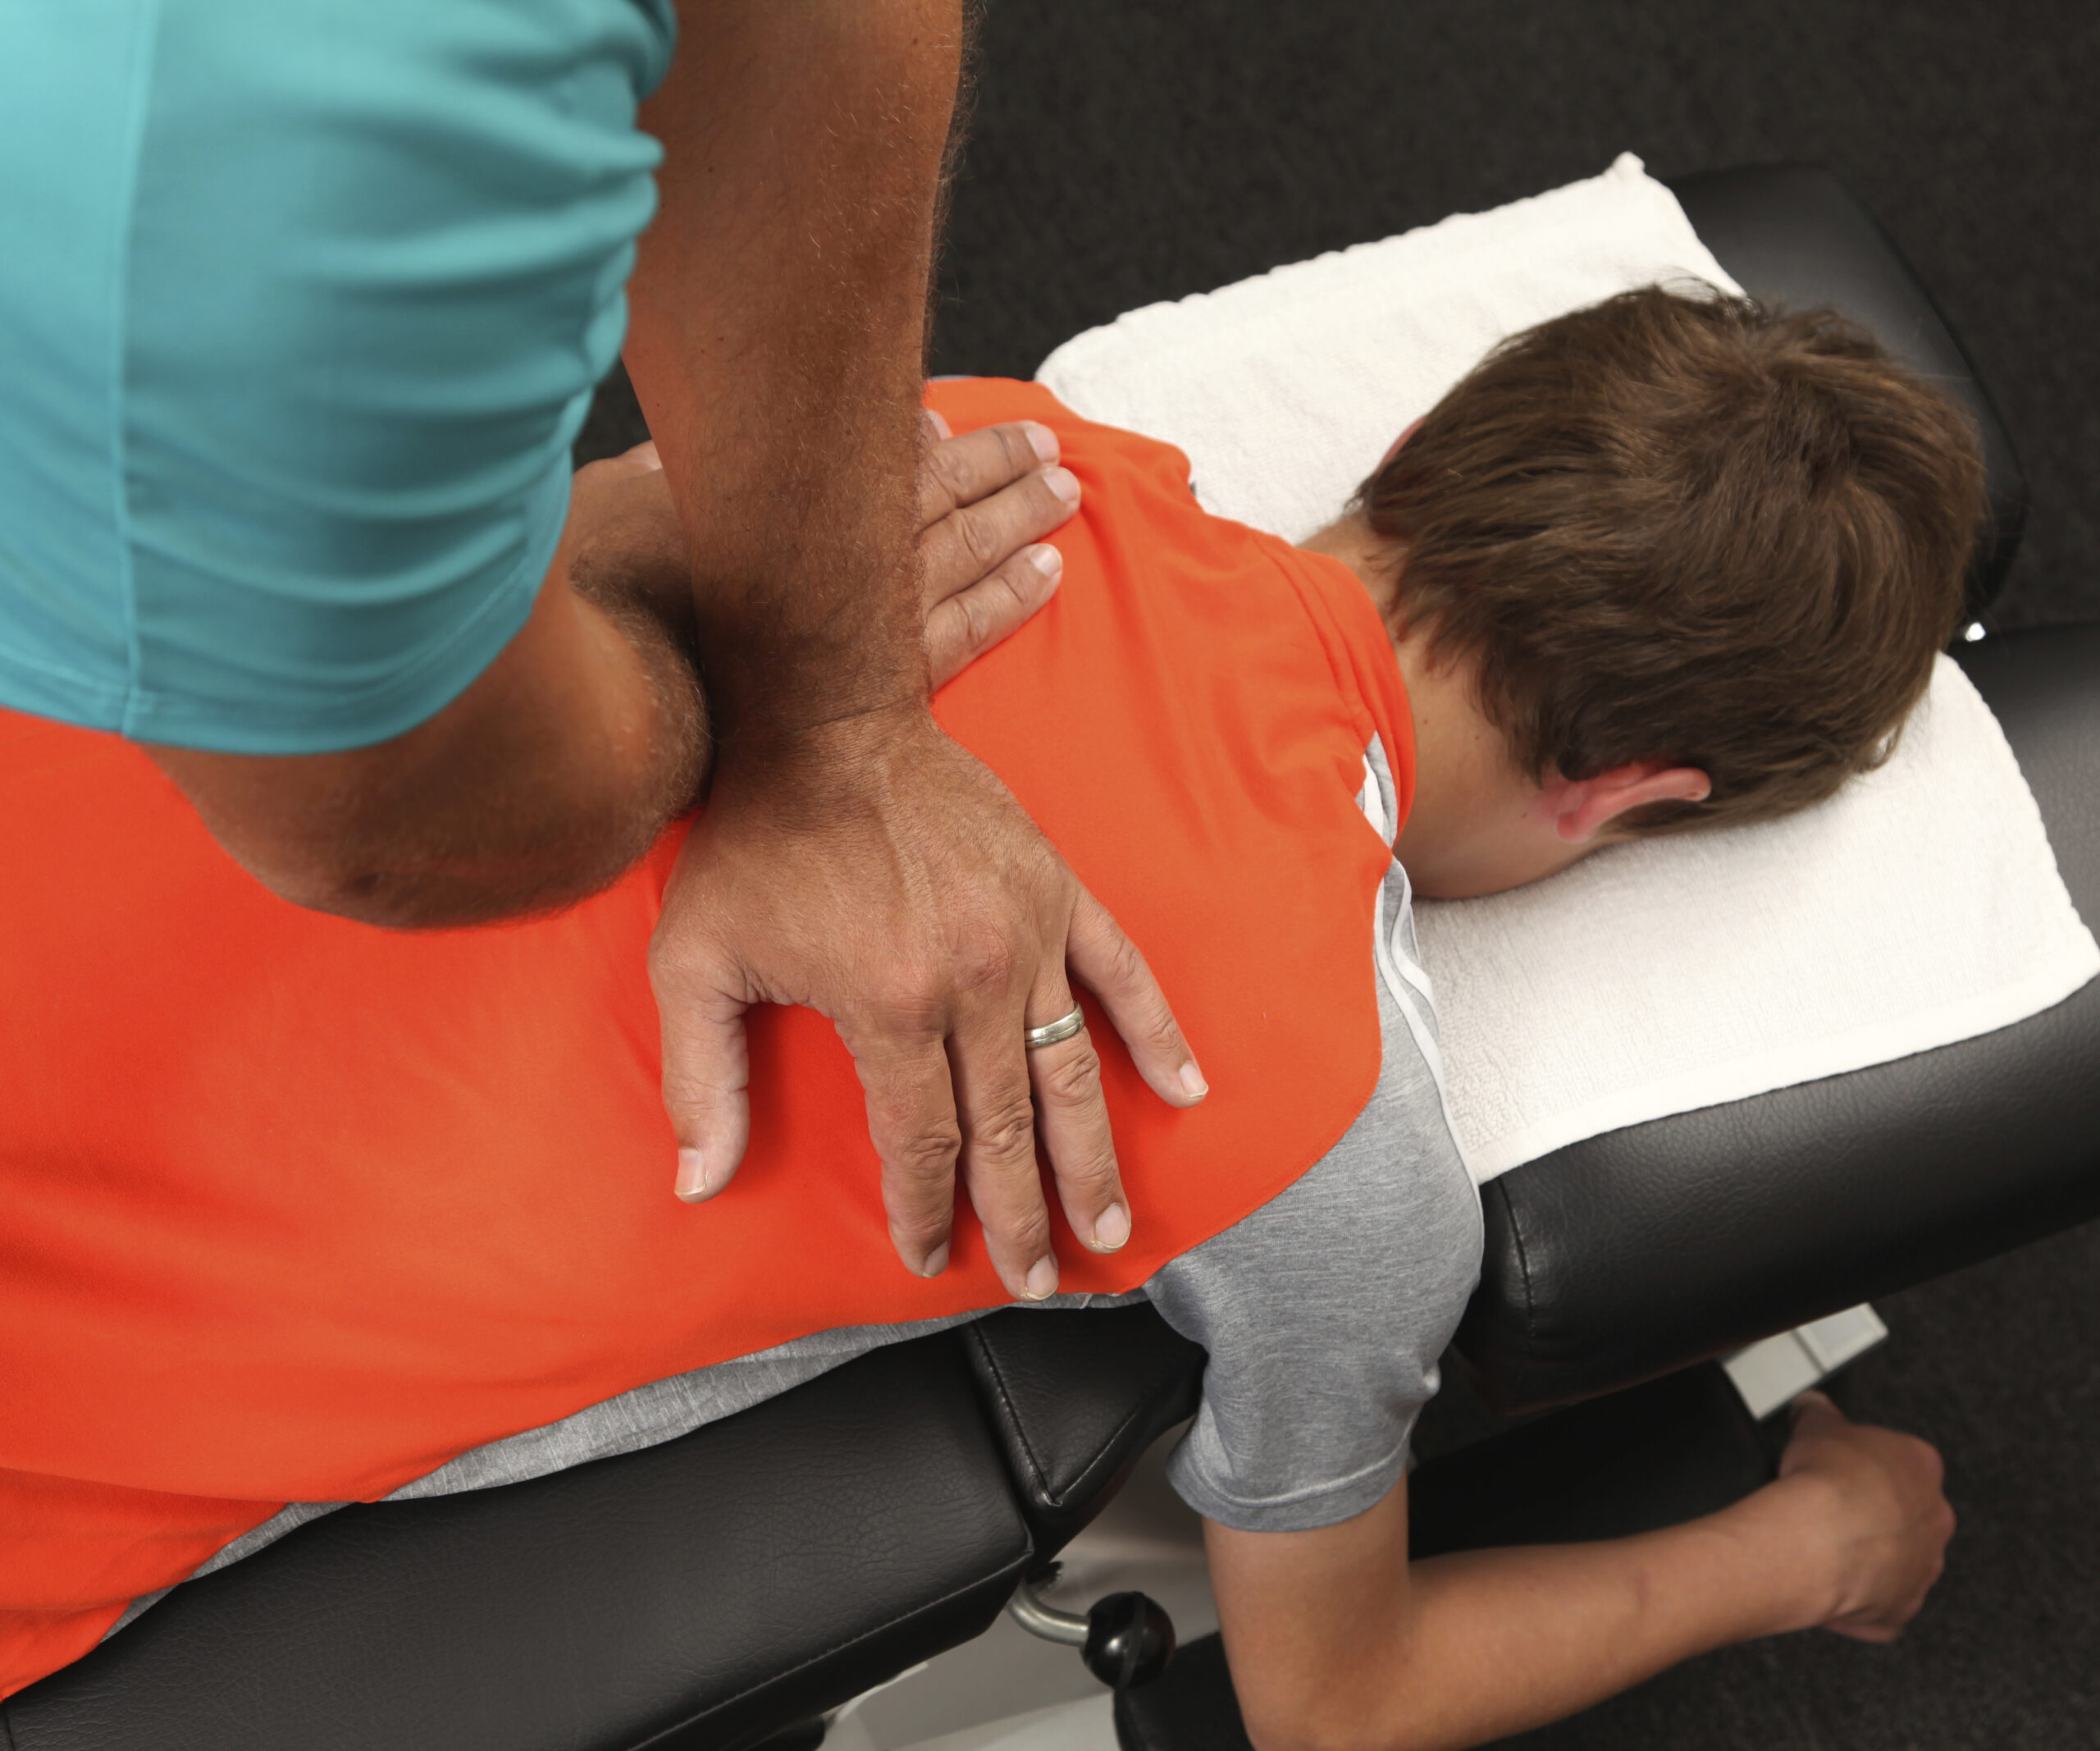 Calls for chiropractors to stay away from kids